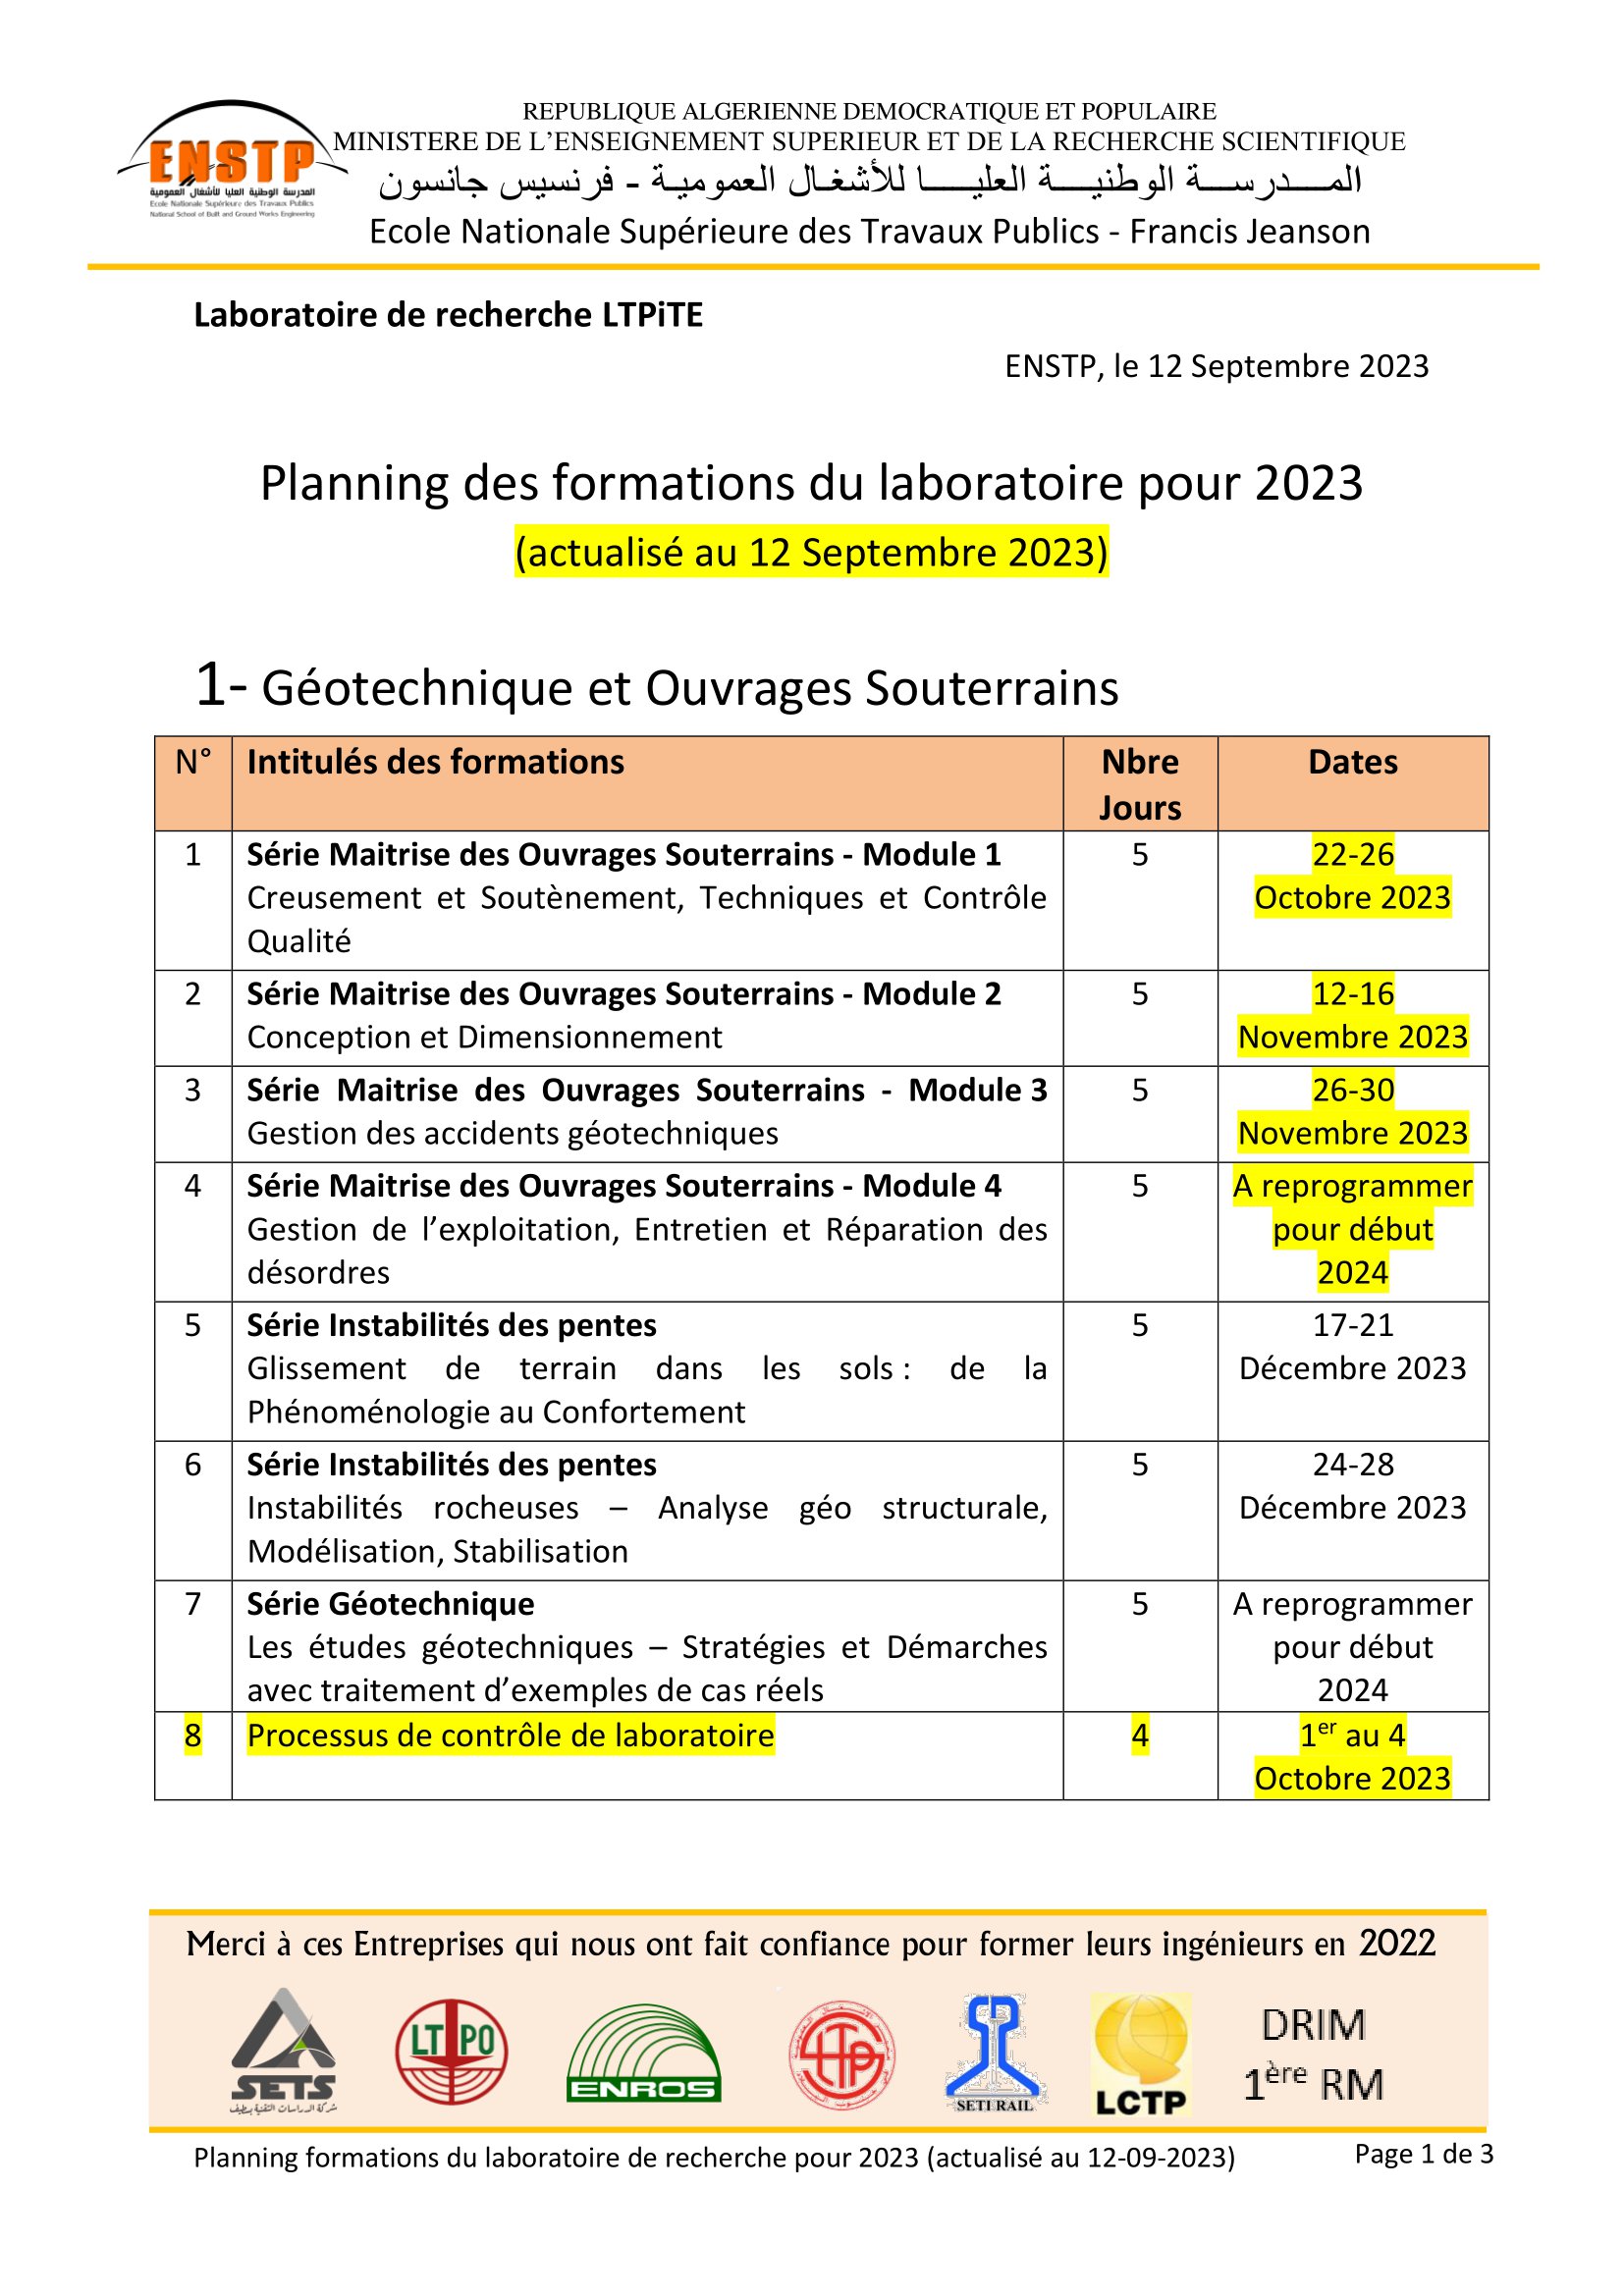 Programme formations labo 2023 actualise 12 9 23 1